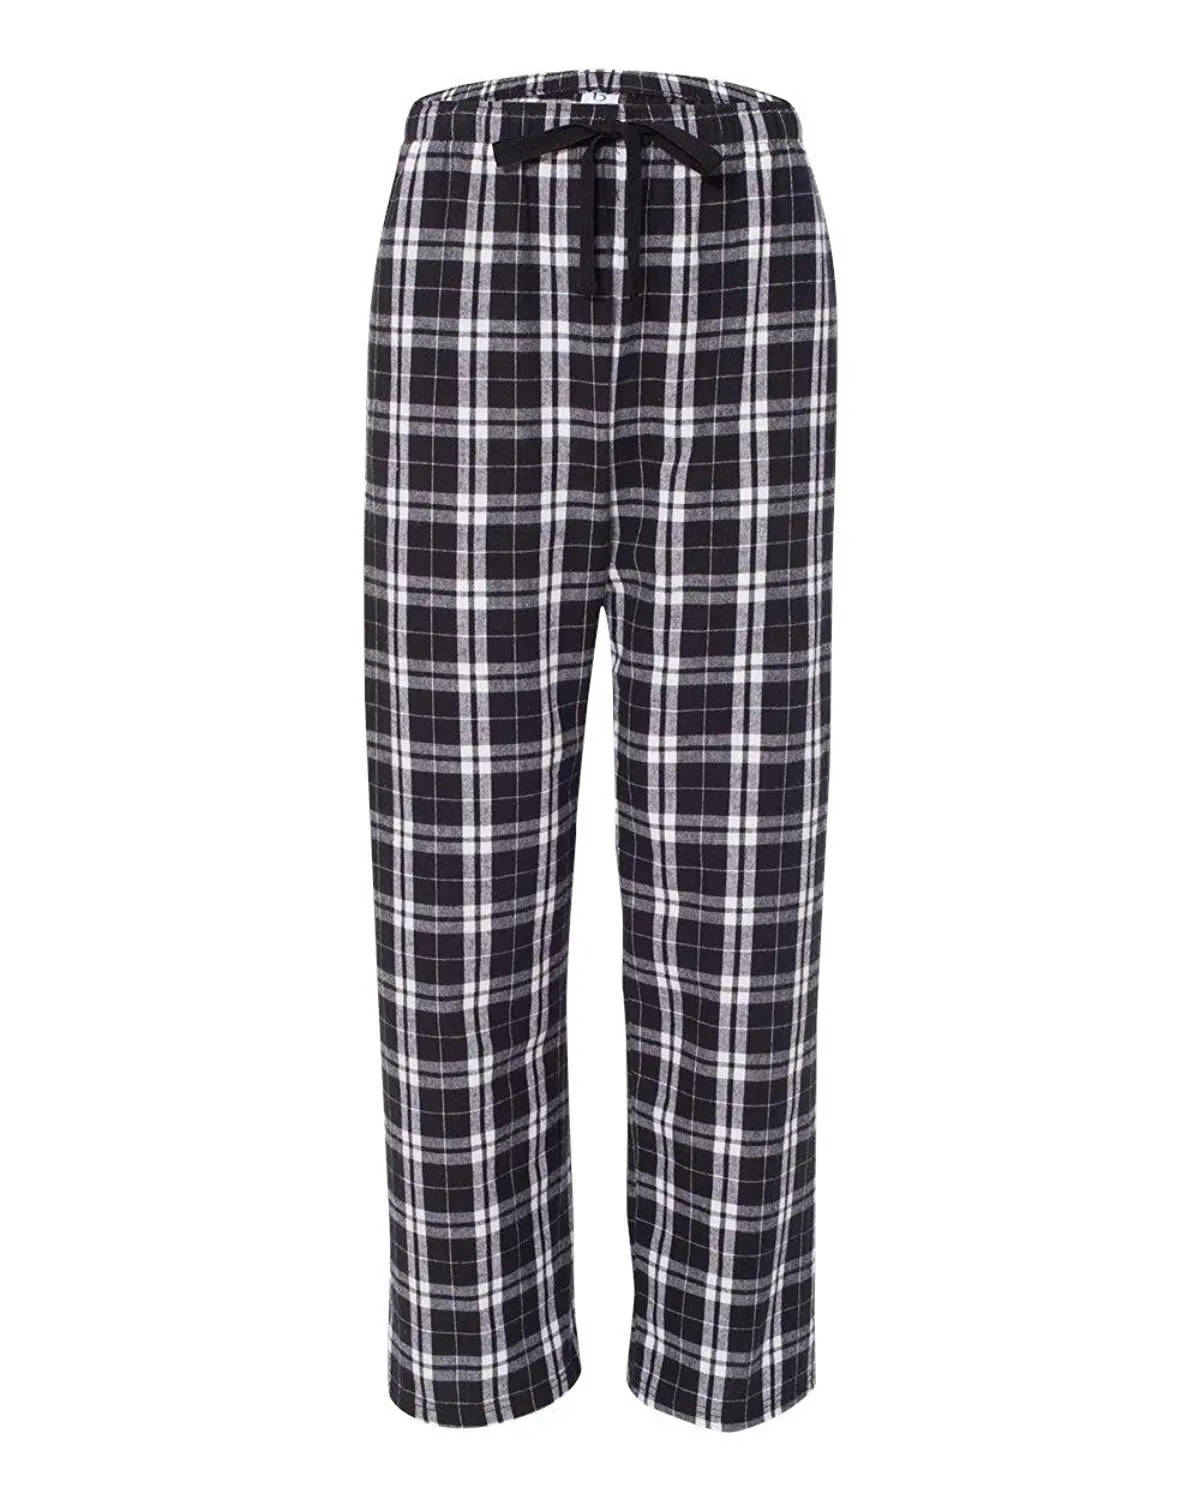 Cheap Black And White Checkered Pants For Women, find Black And White ...